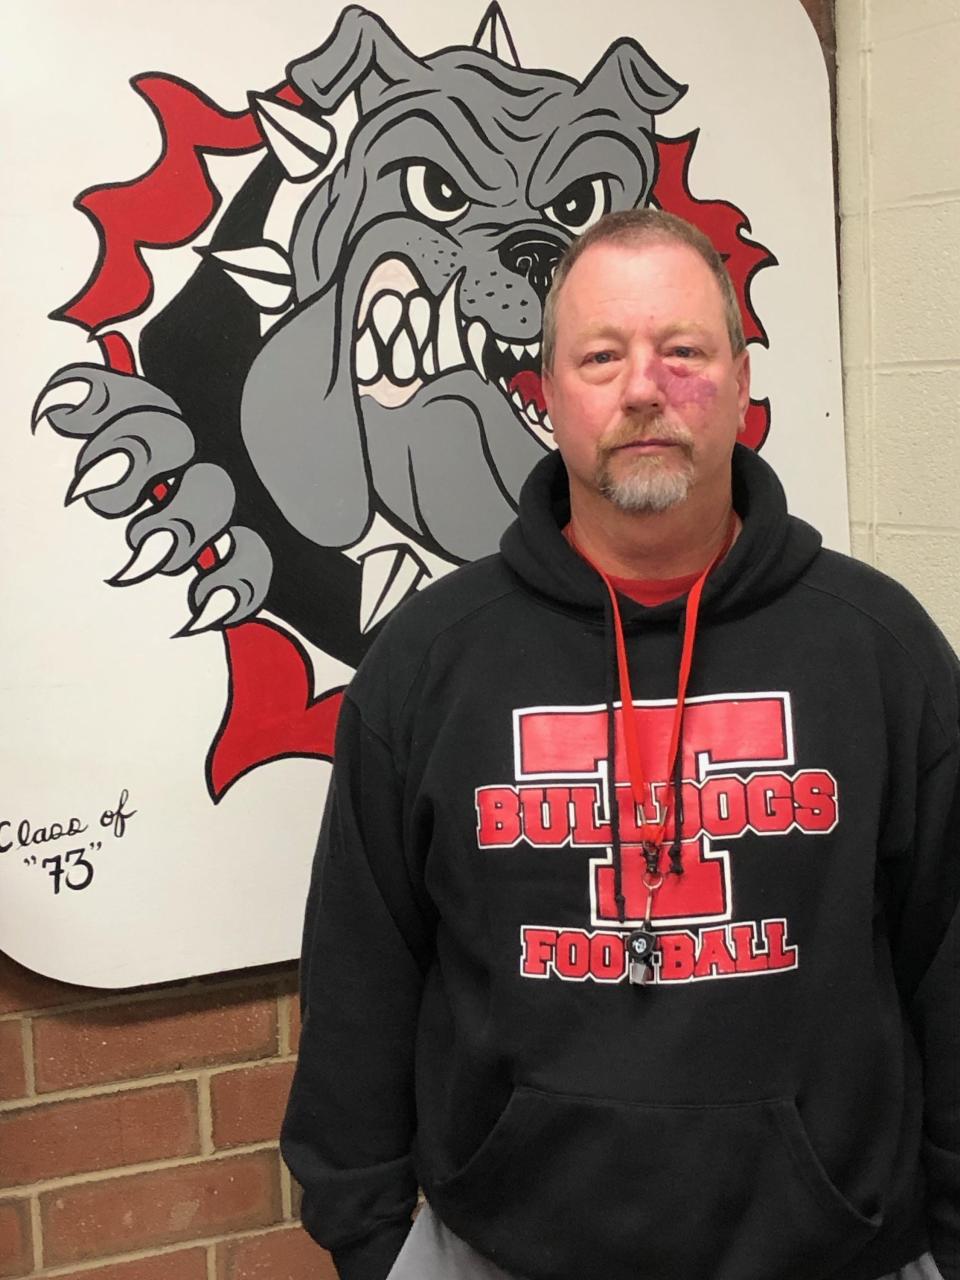 Thomasville football coach Kevin Gillespie has a history of winning, and has the Bulldogs into the third round of the playoffs for the first time in a decade.